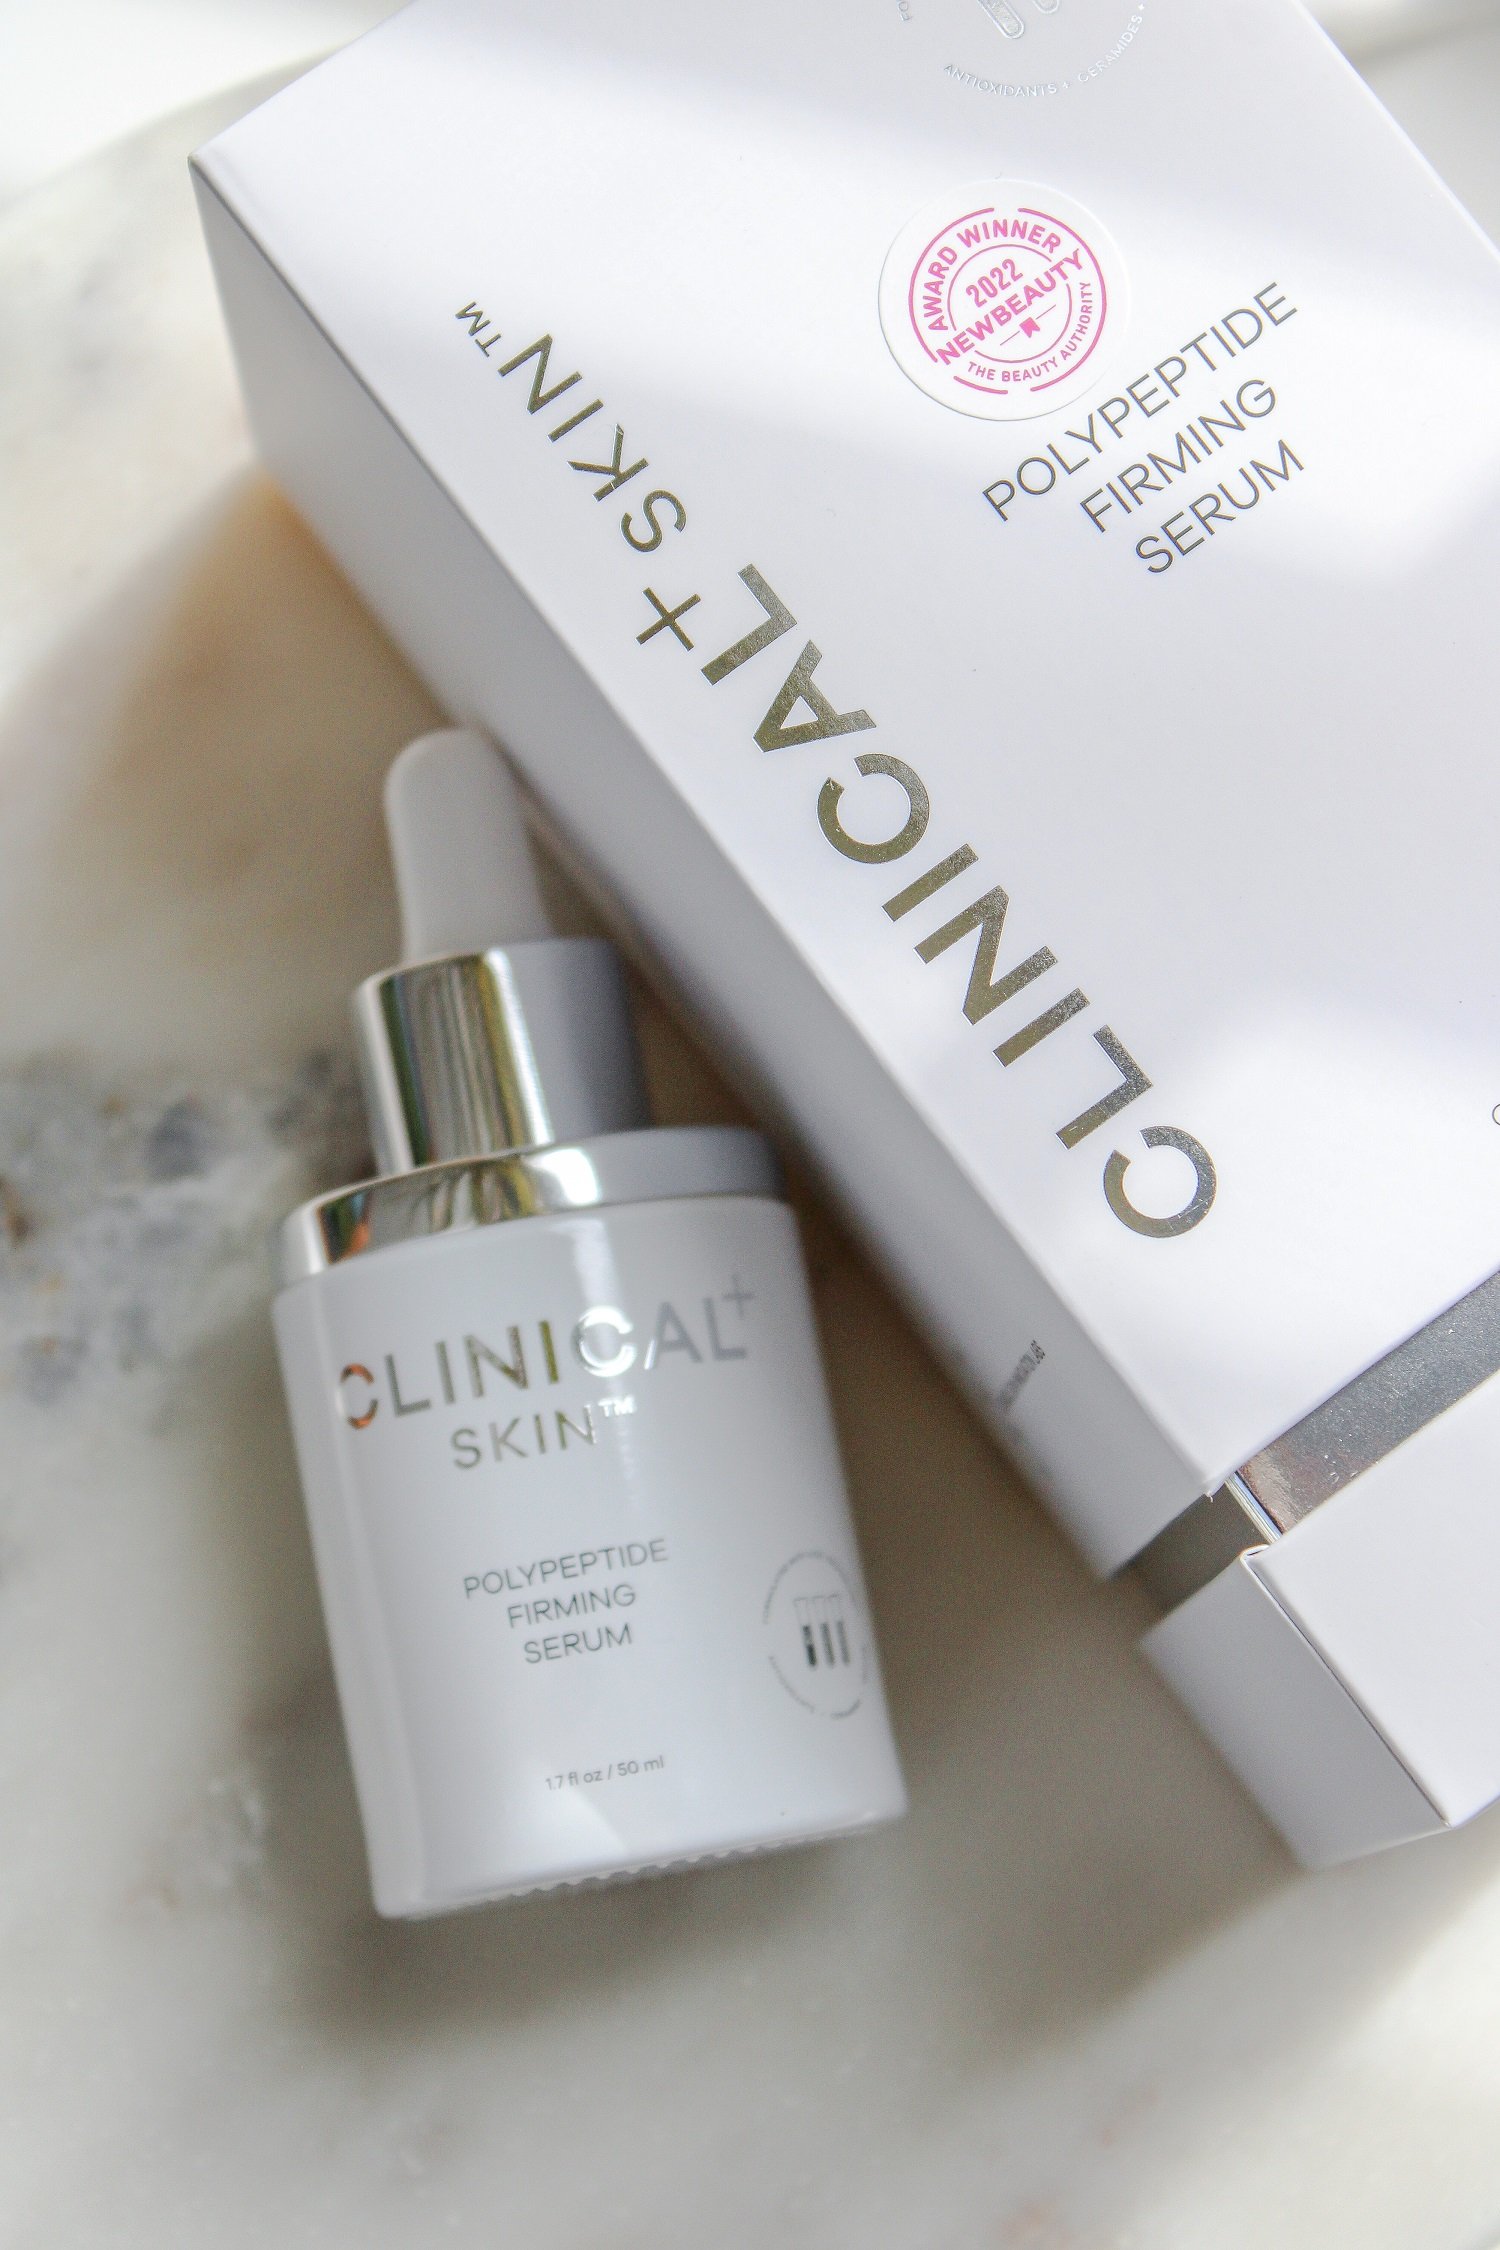 Clinical Skin Polypeptide Firming Serum review...